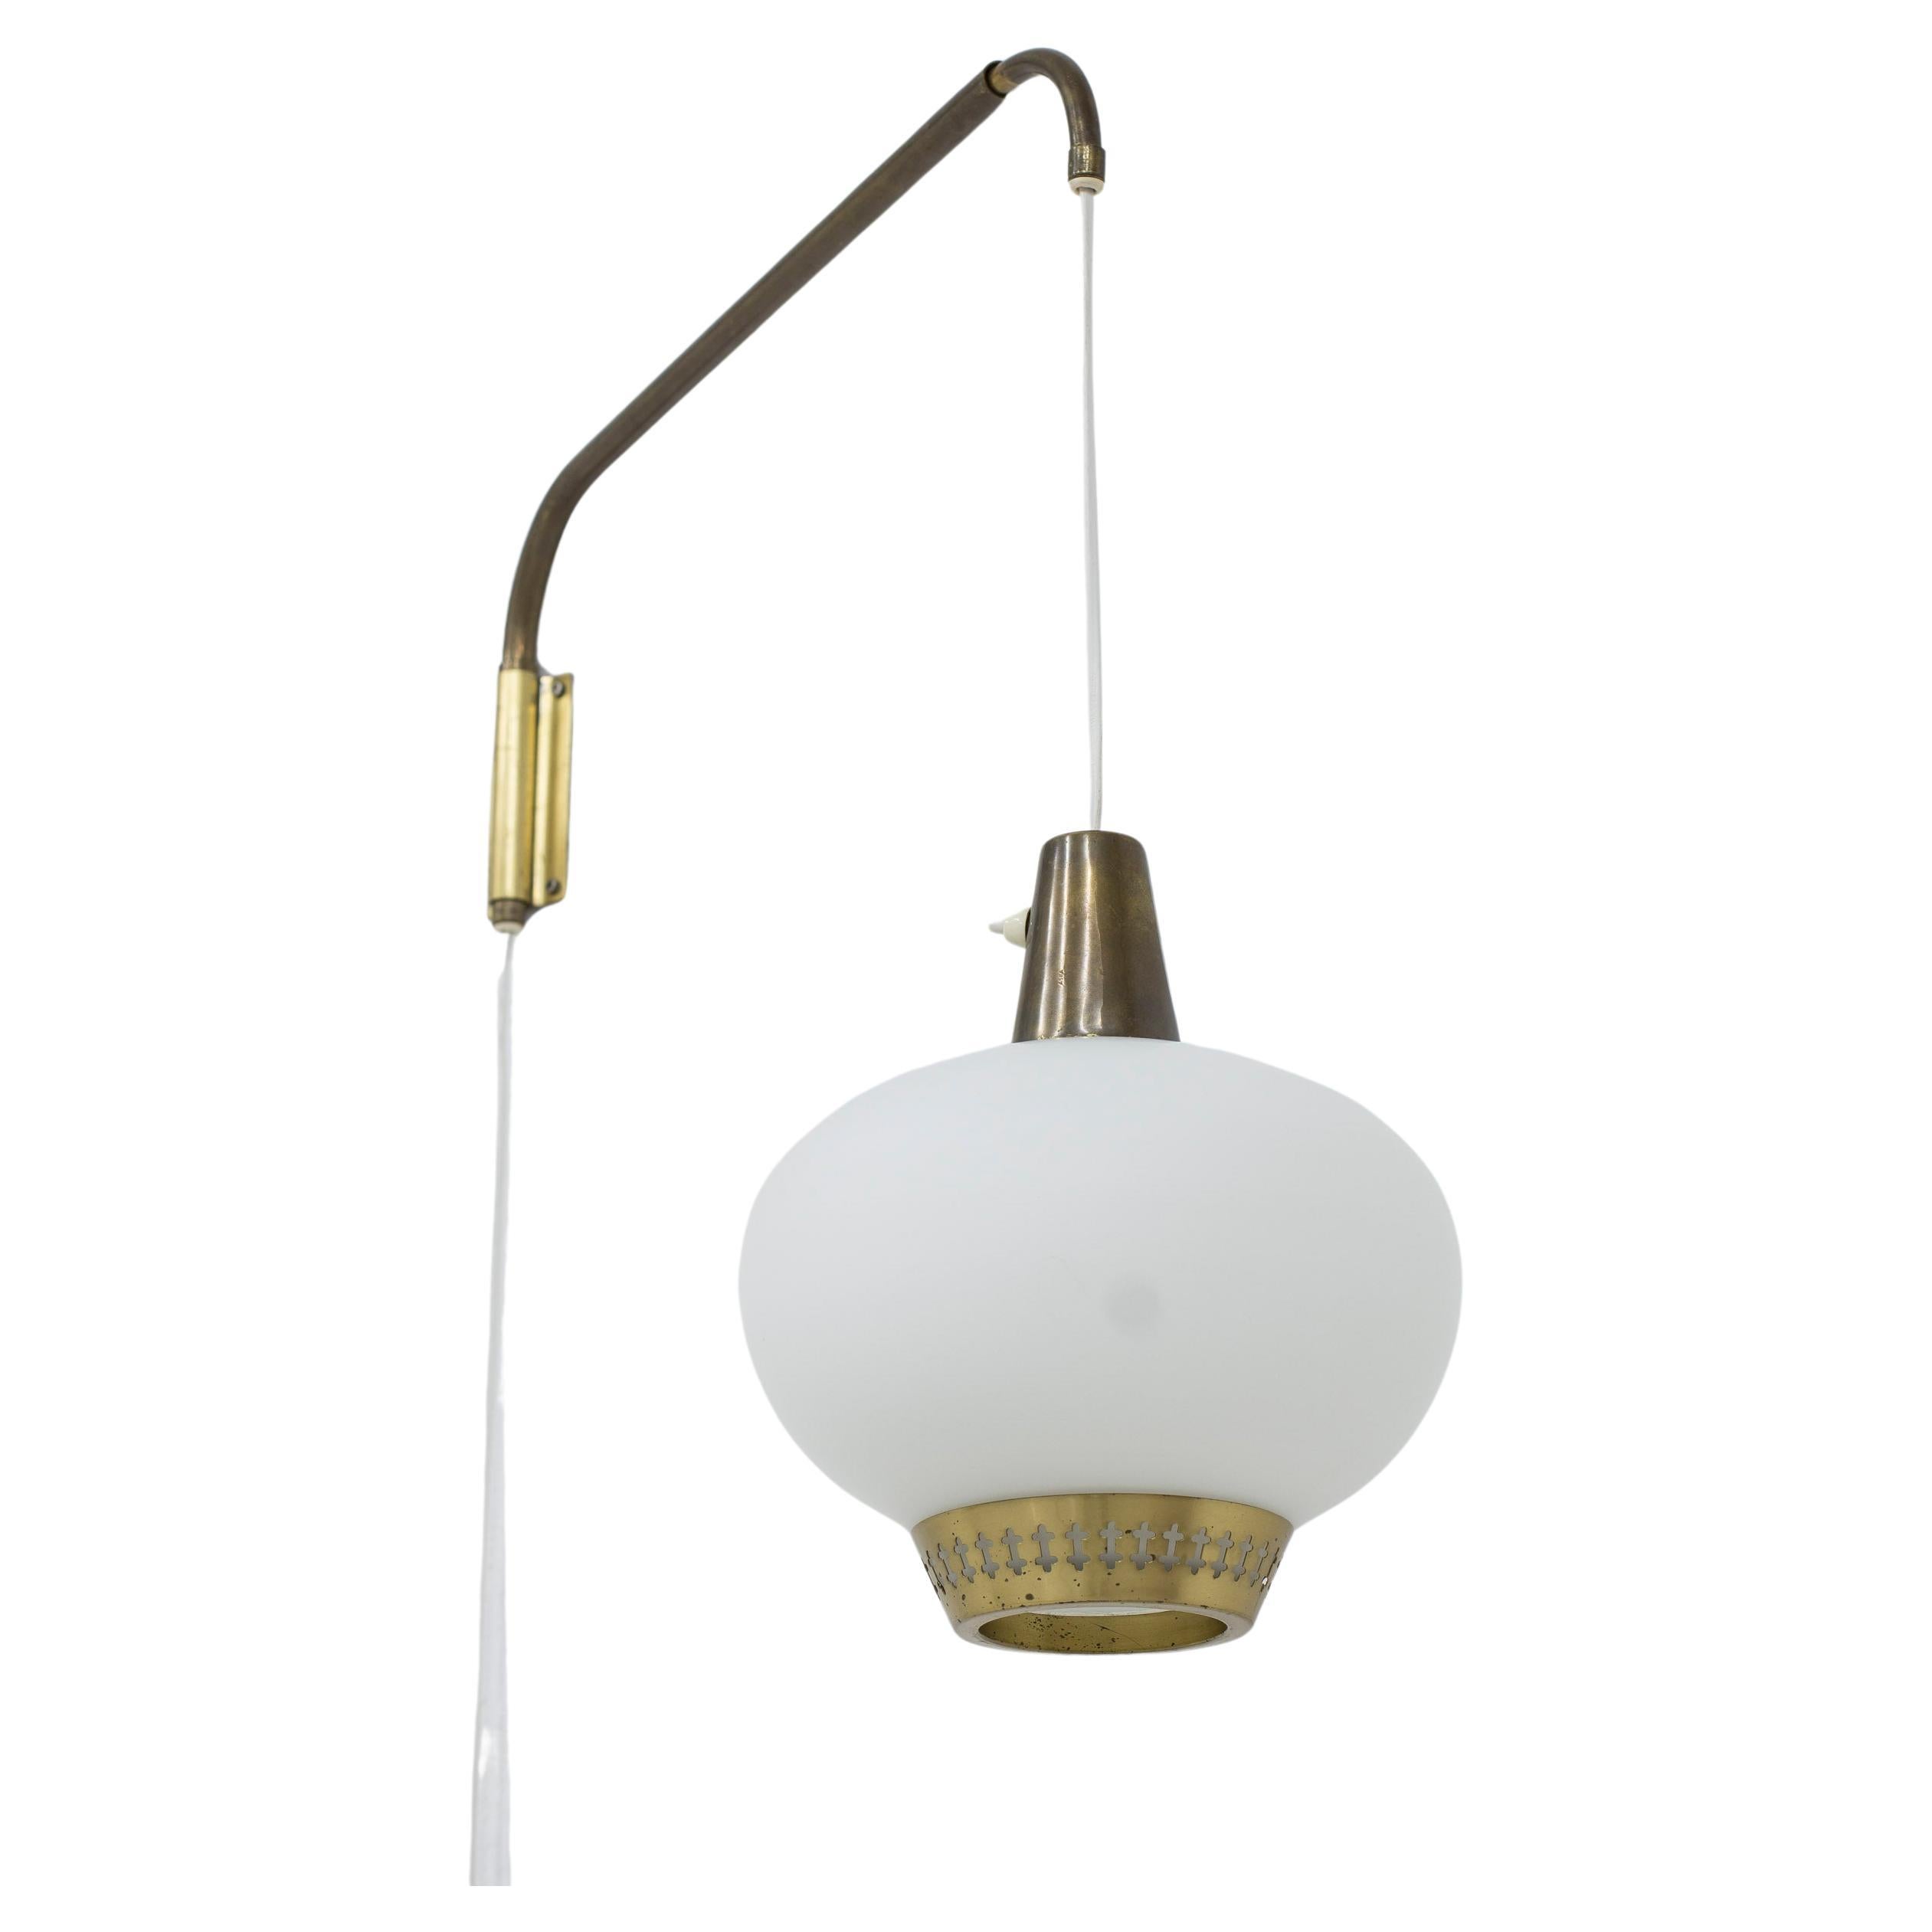 Glass and brass wall lamp by Hans Bergström for ASEA belysning, Swedish modern